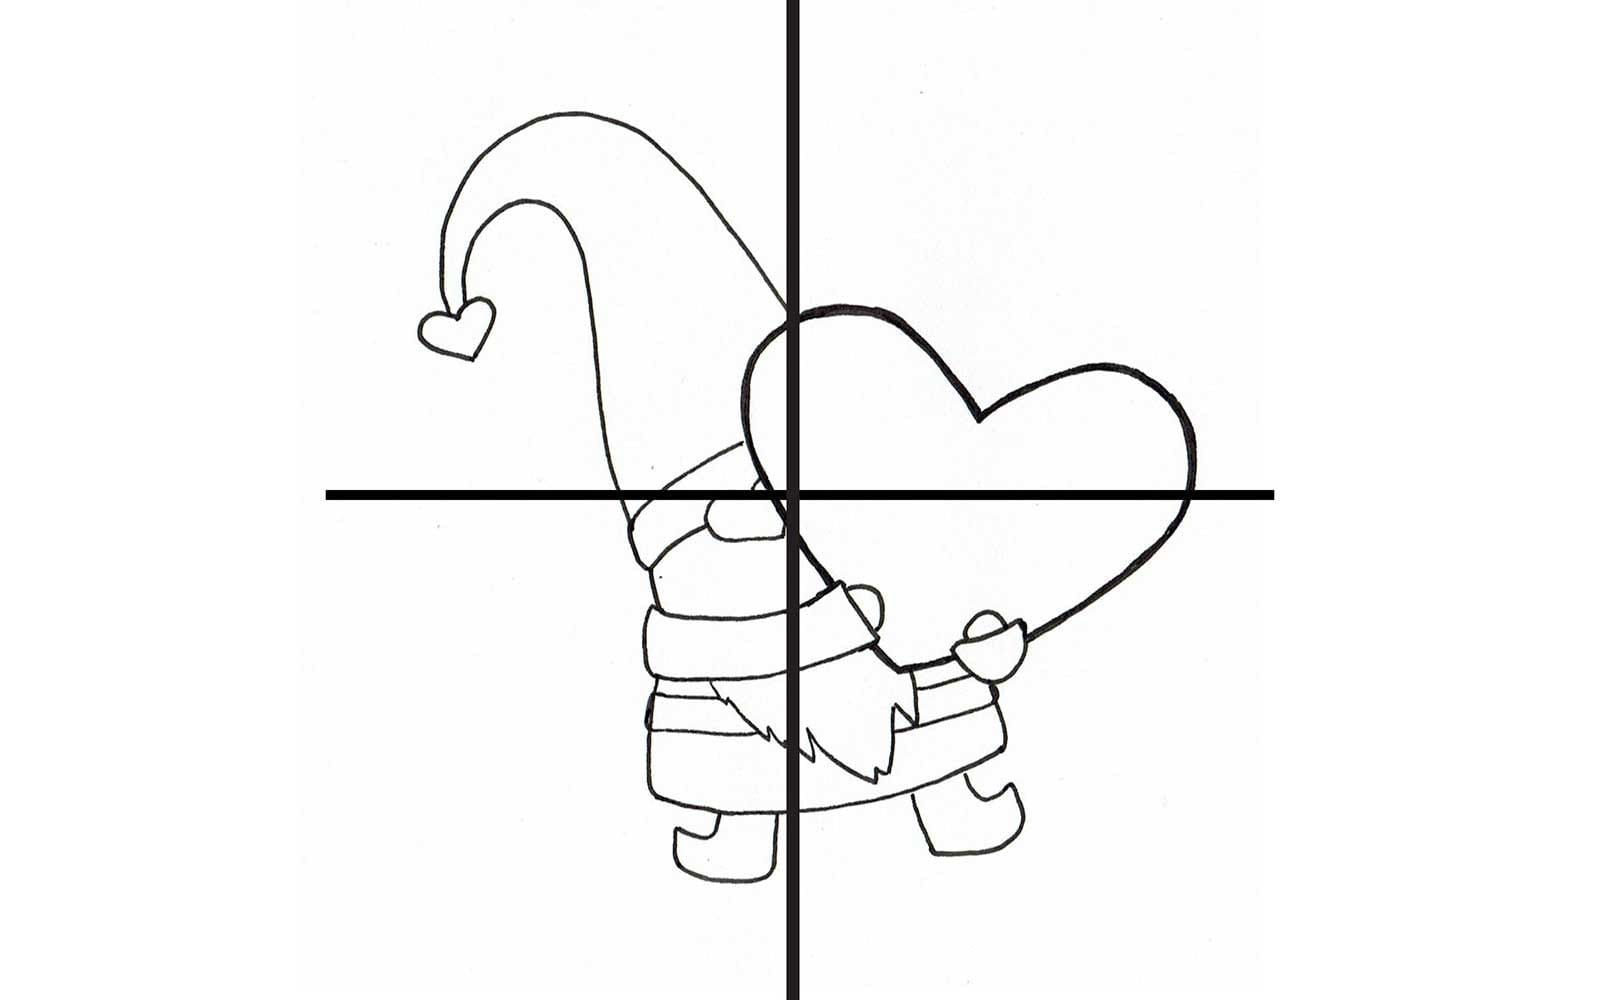 Babe gnome diagram with placement cross mark